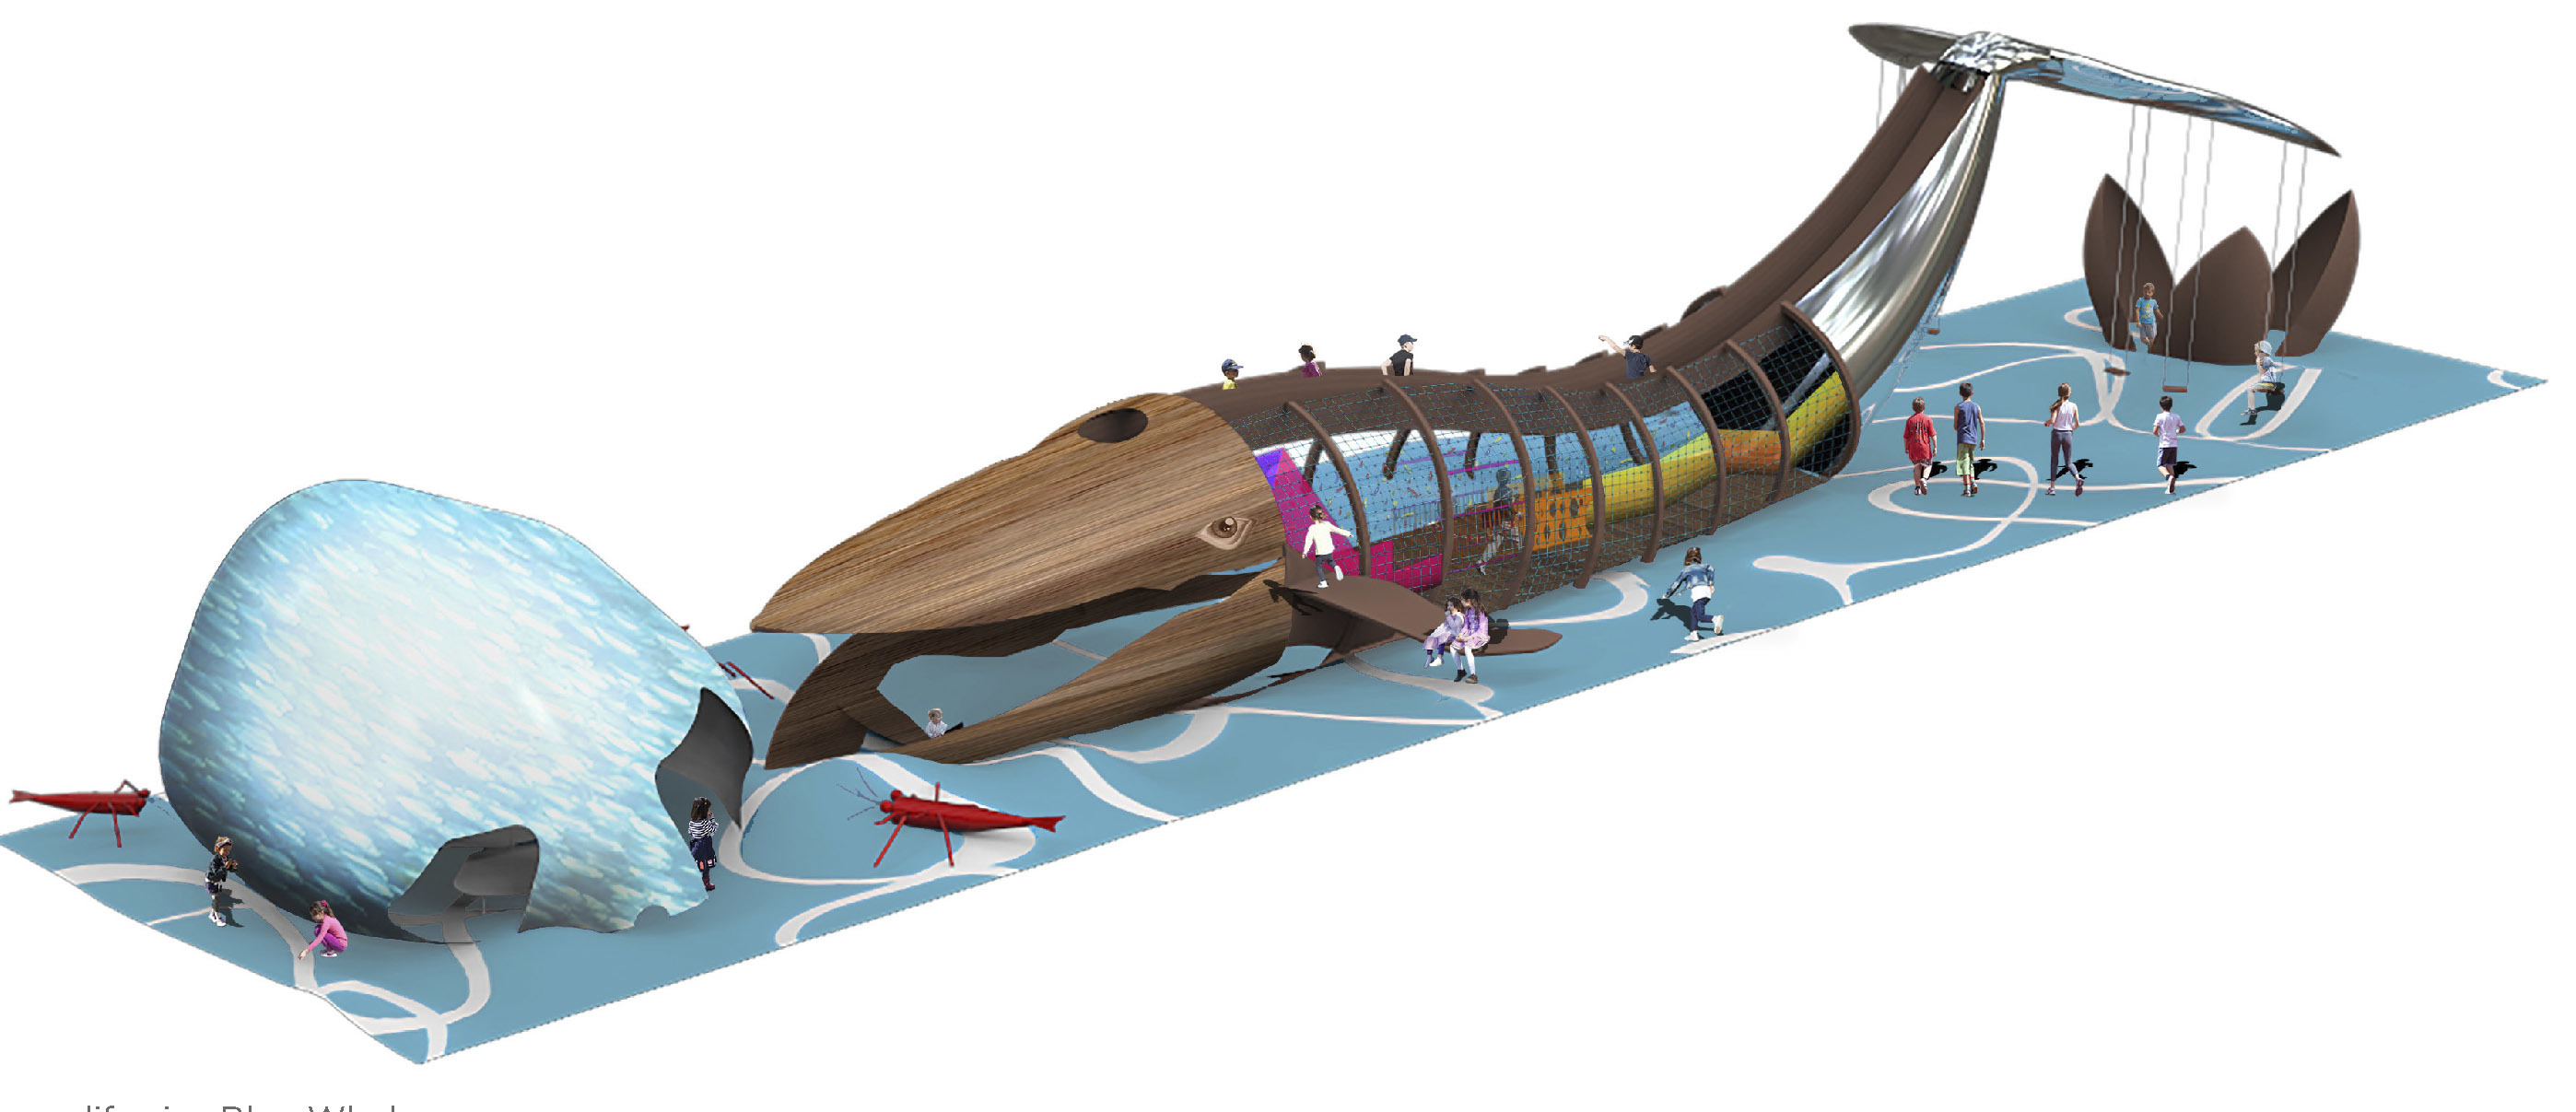 The initial concept proposal of the whale